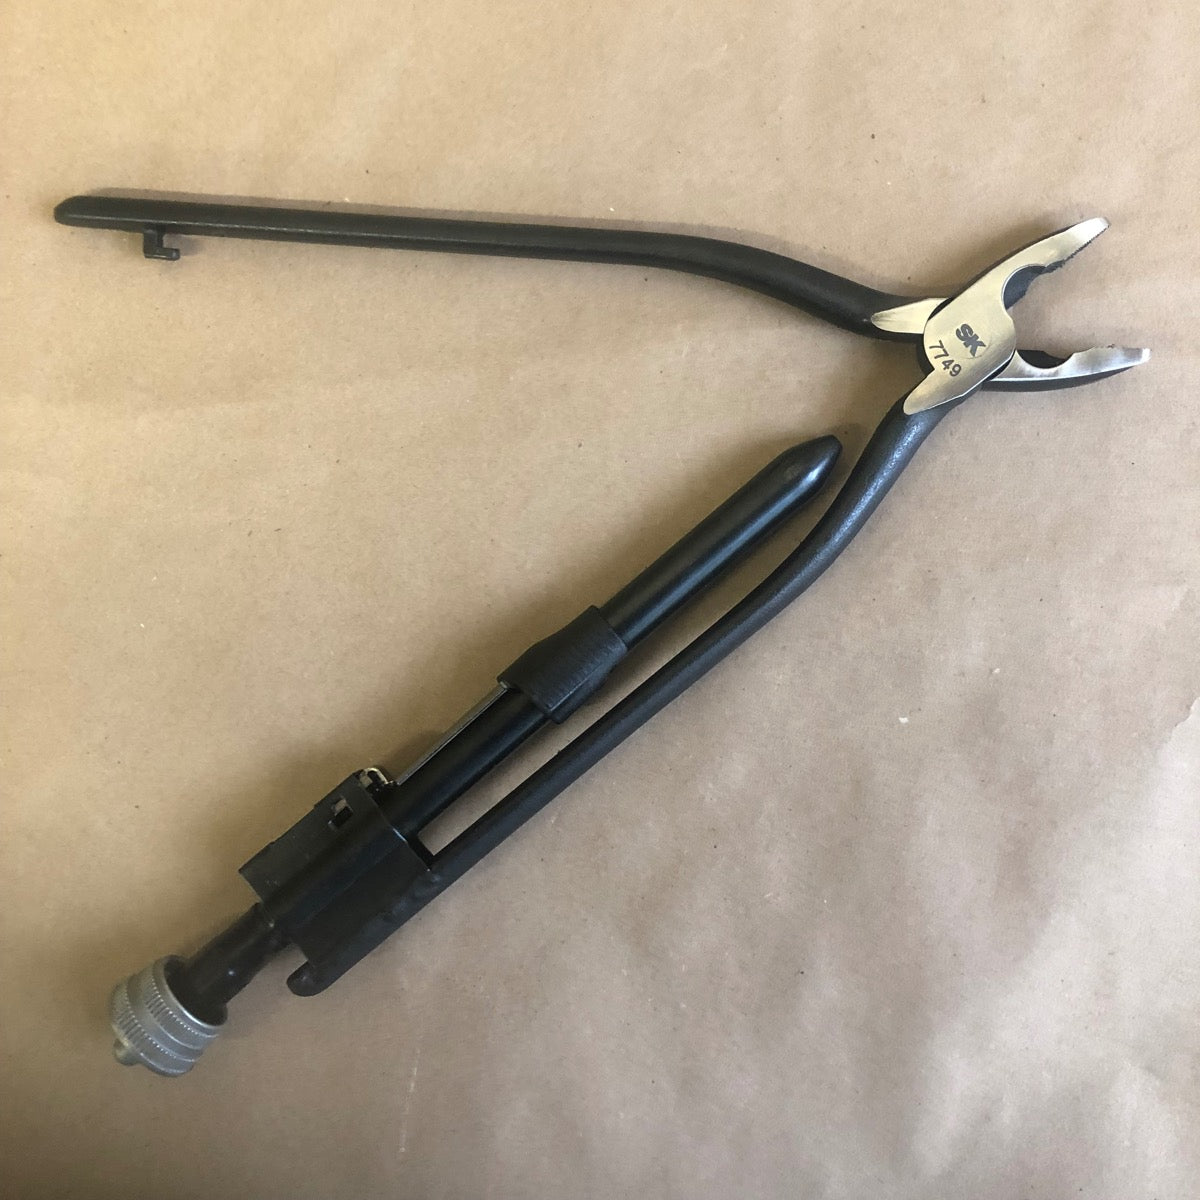 12" automatic right hand diagonal nose wire twister pliers